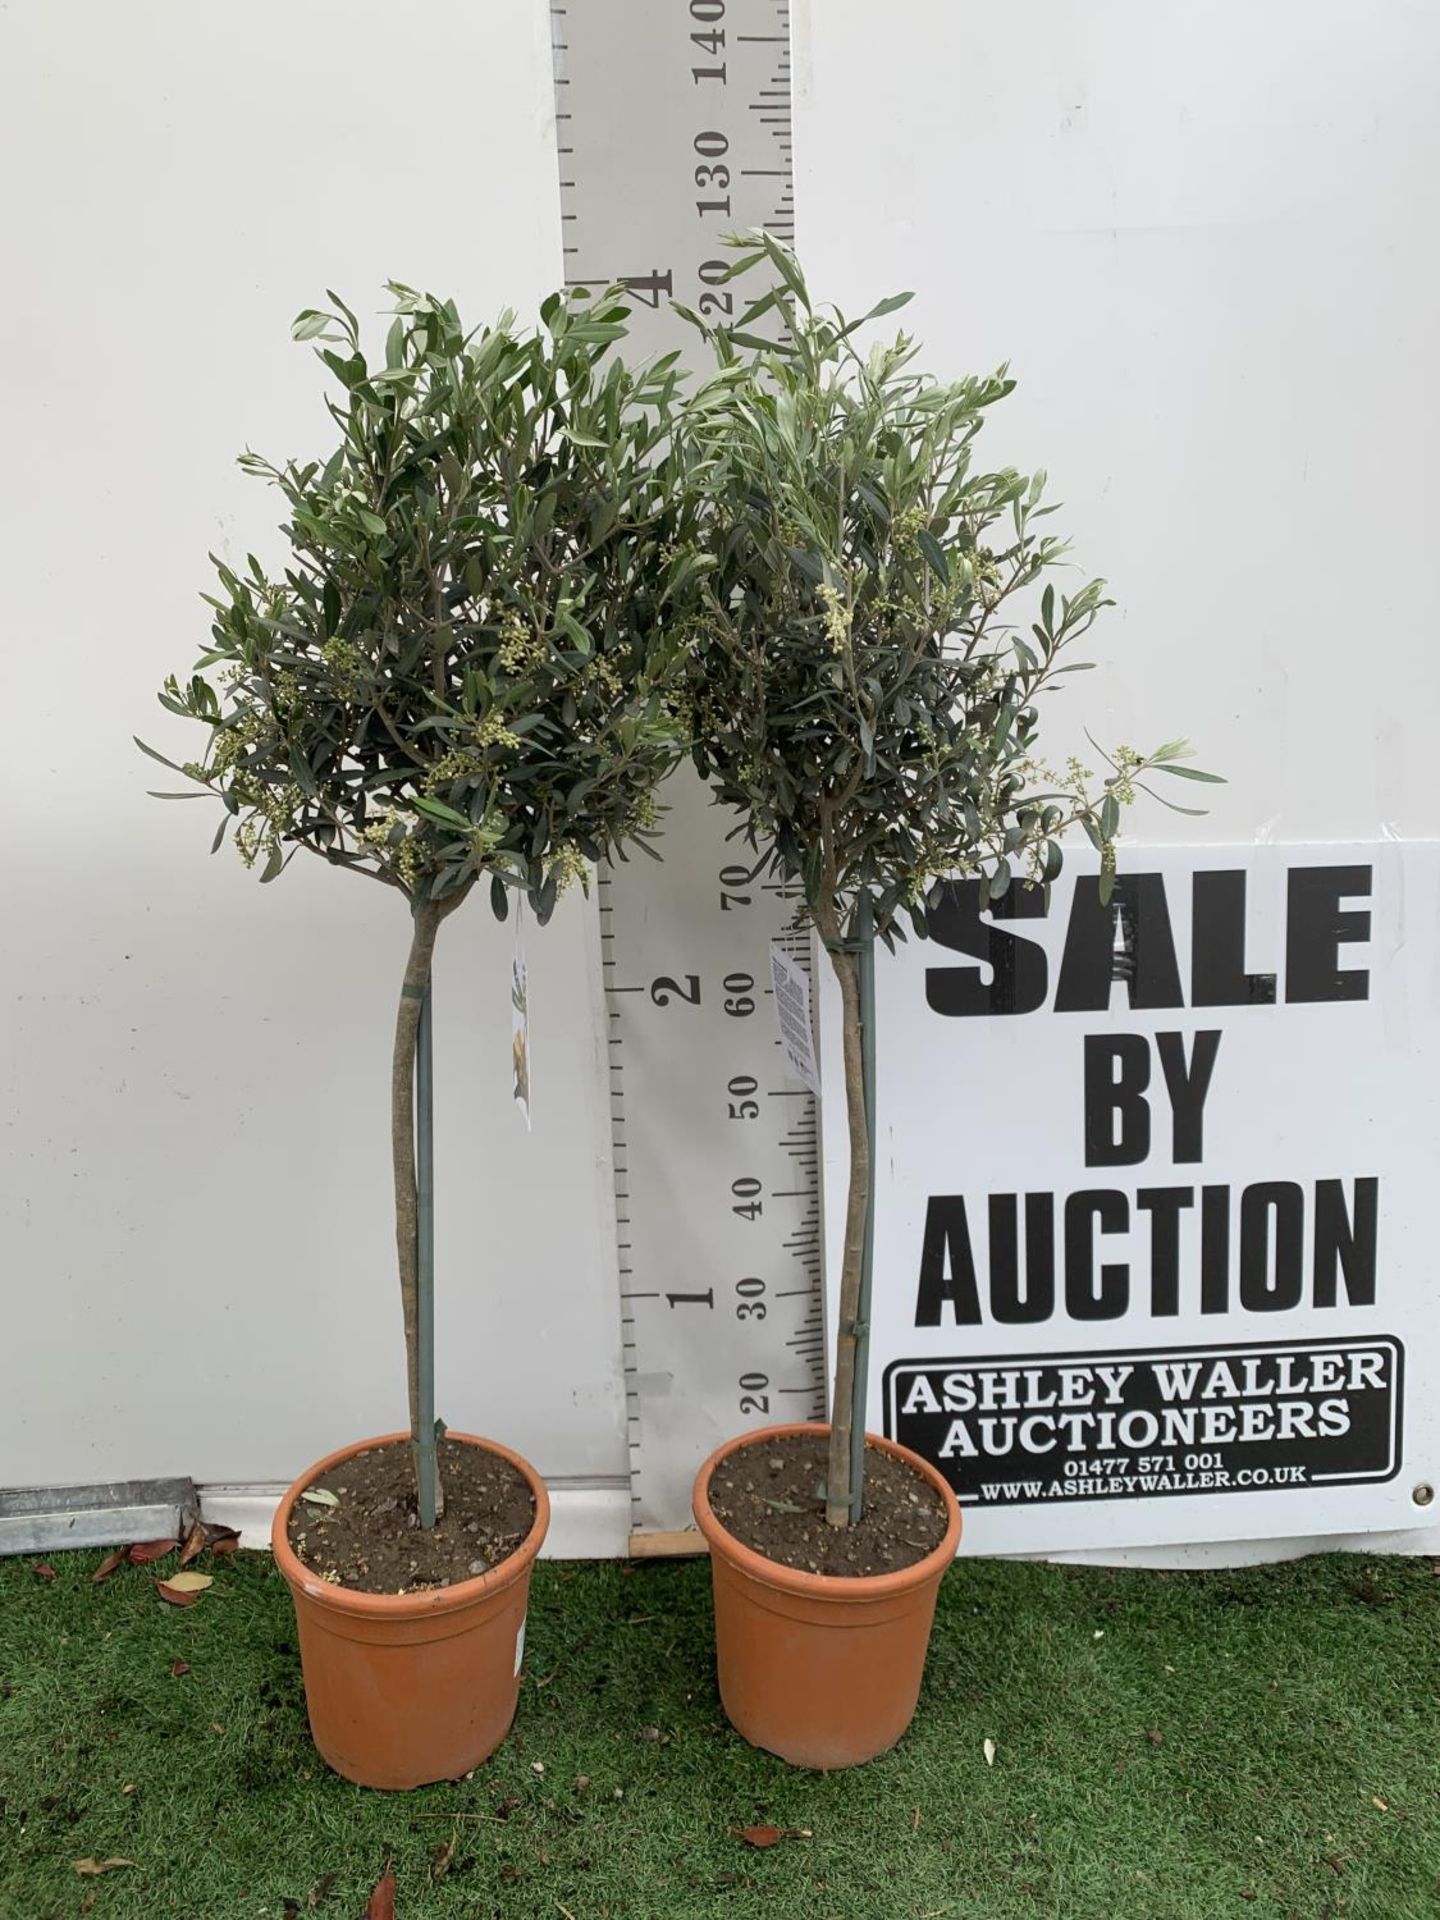 A PAIR OF STANDARD OLEA OLIVE EUROPAEA TREES IN 4 LTR POTS 120CM TALL TO BE SOLD FOR THE TWO NO VAT - Image 2 of 6